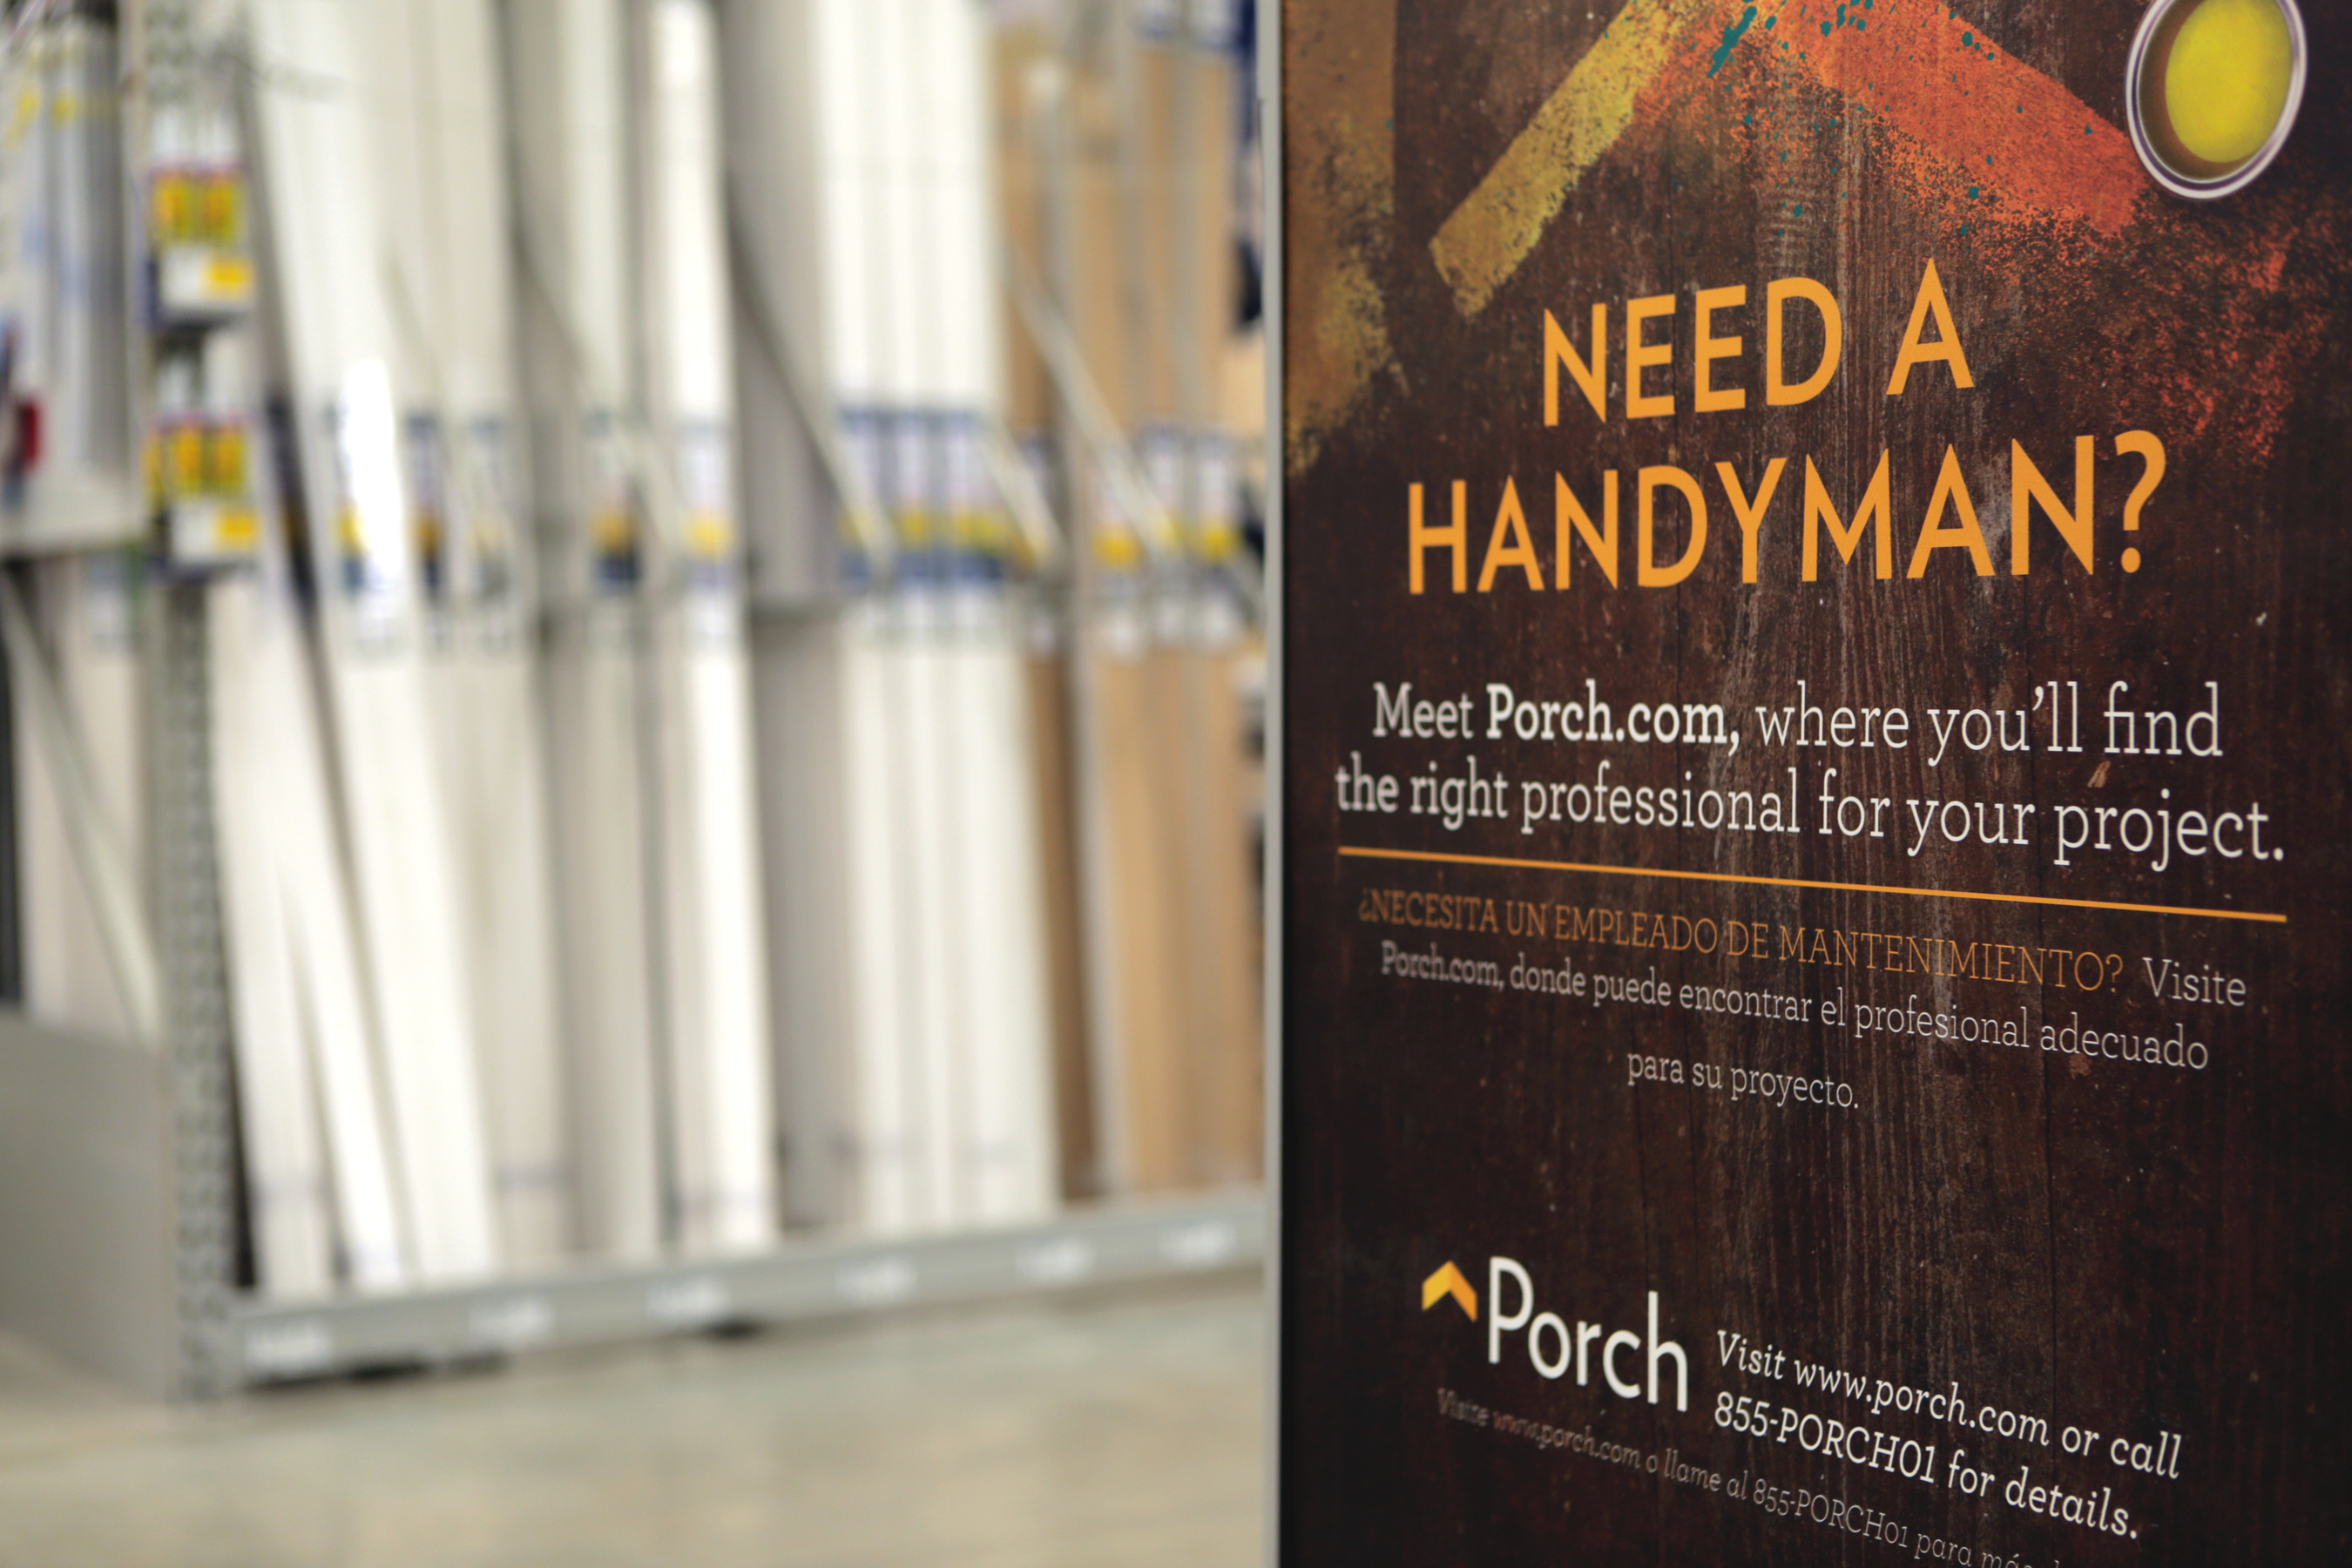 Every Lowe's store in the country now features Porch as the in-store resource to help homeowners find the right home improvement professionals for nearly any project outside of Lowe's current installation services. (PRNewsFoto/Lowe's Companies, Inc.)